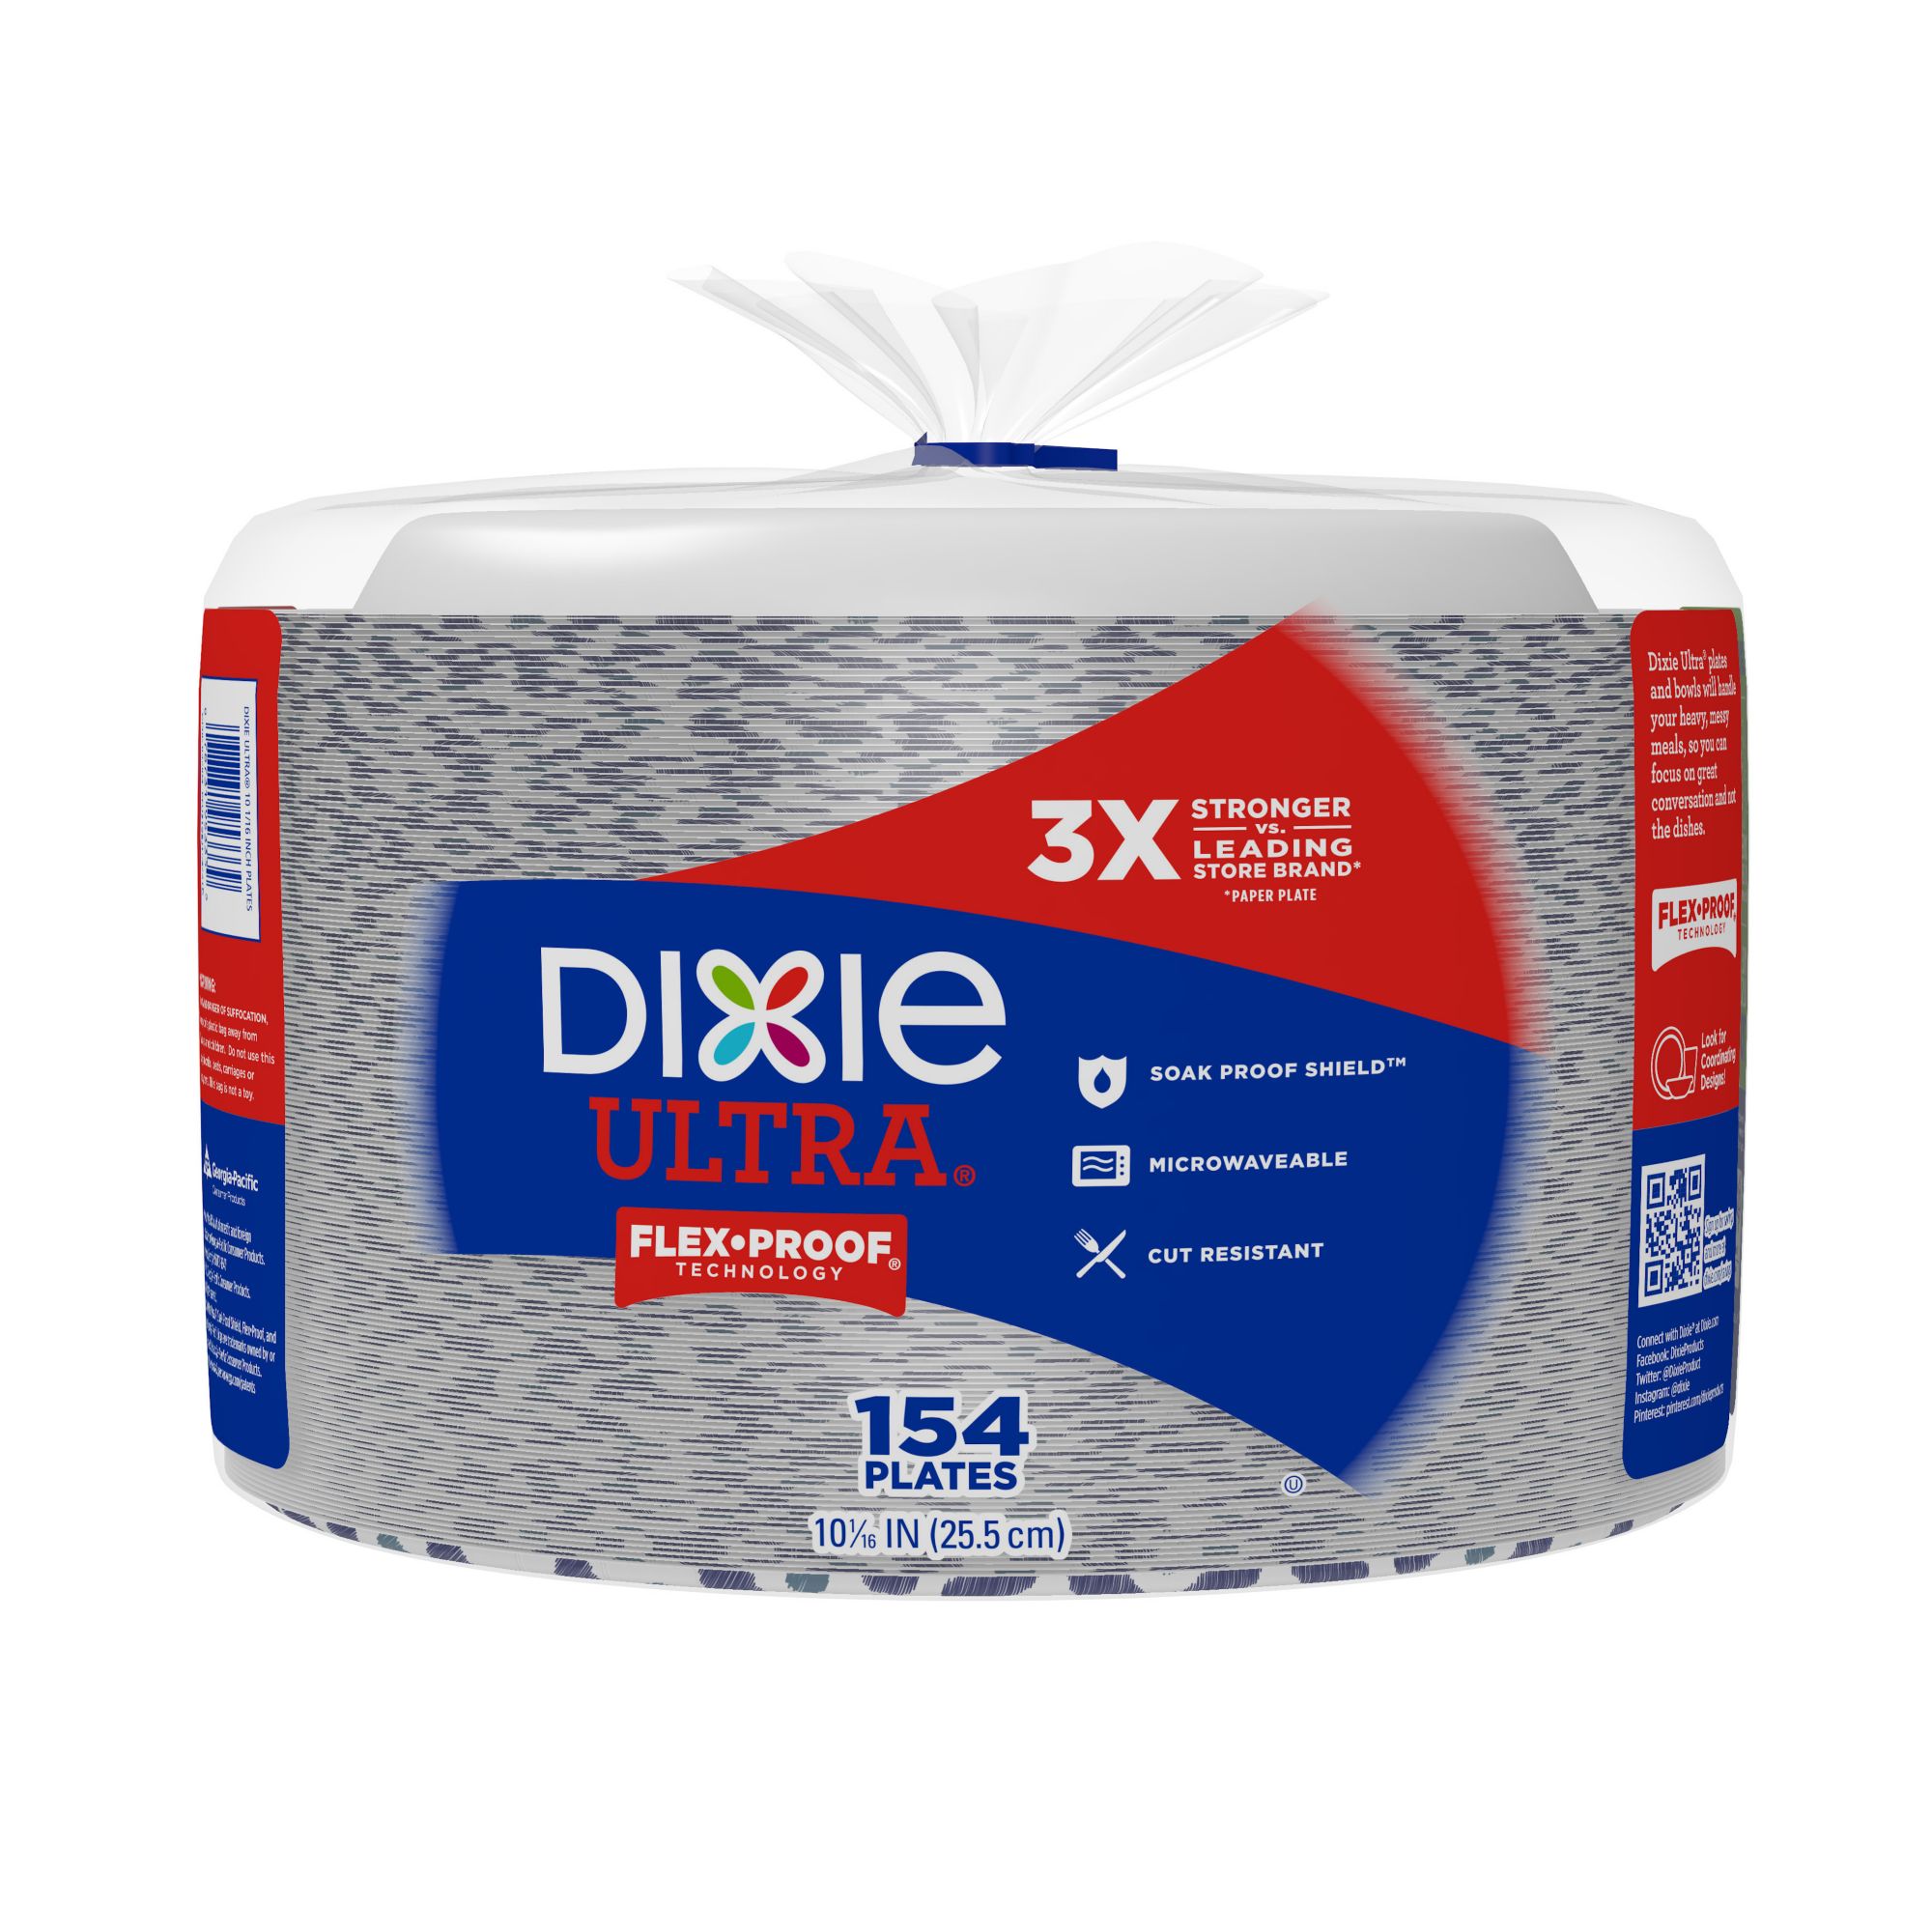  Dixie Ultra Disposable Paper Plates, 8 ½ inch, Lunch or Light  Dinner Size Printed Disposable Plates, 300 count (10 Packs of 30 Plates),  Packaging and Design May Vary : Health & Household